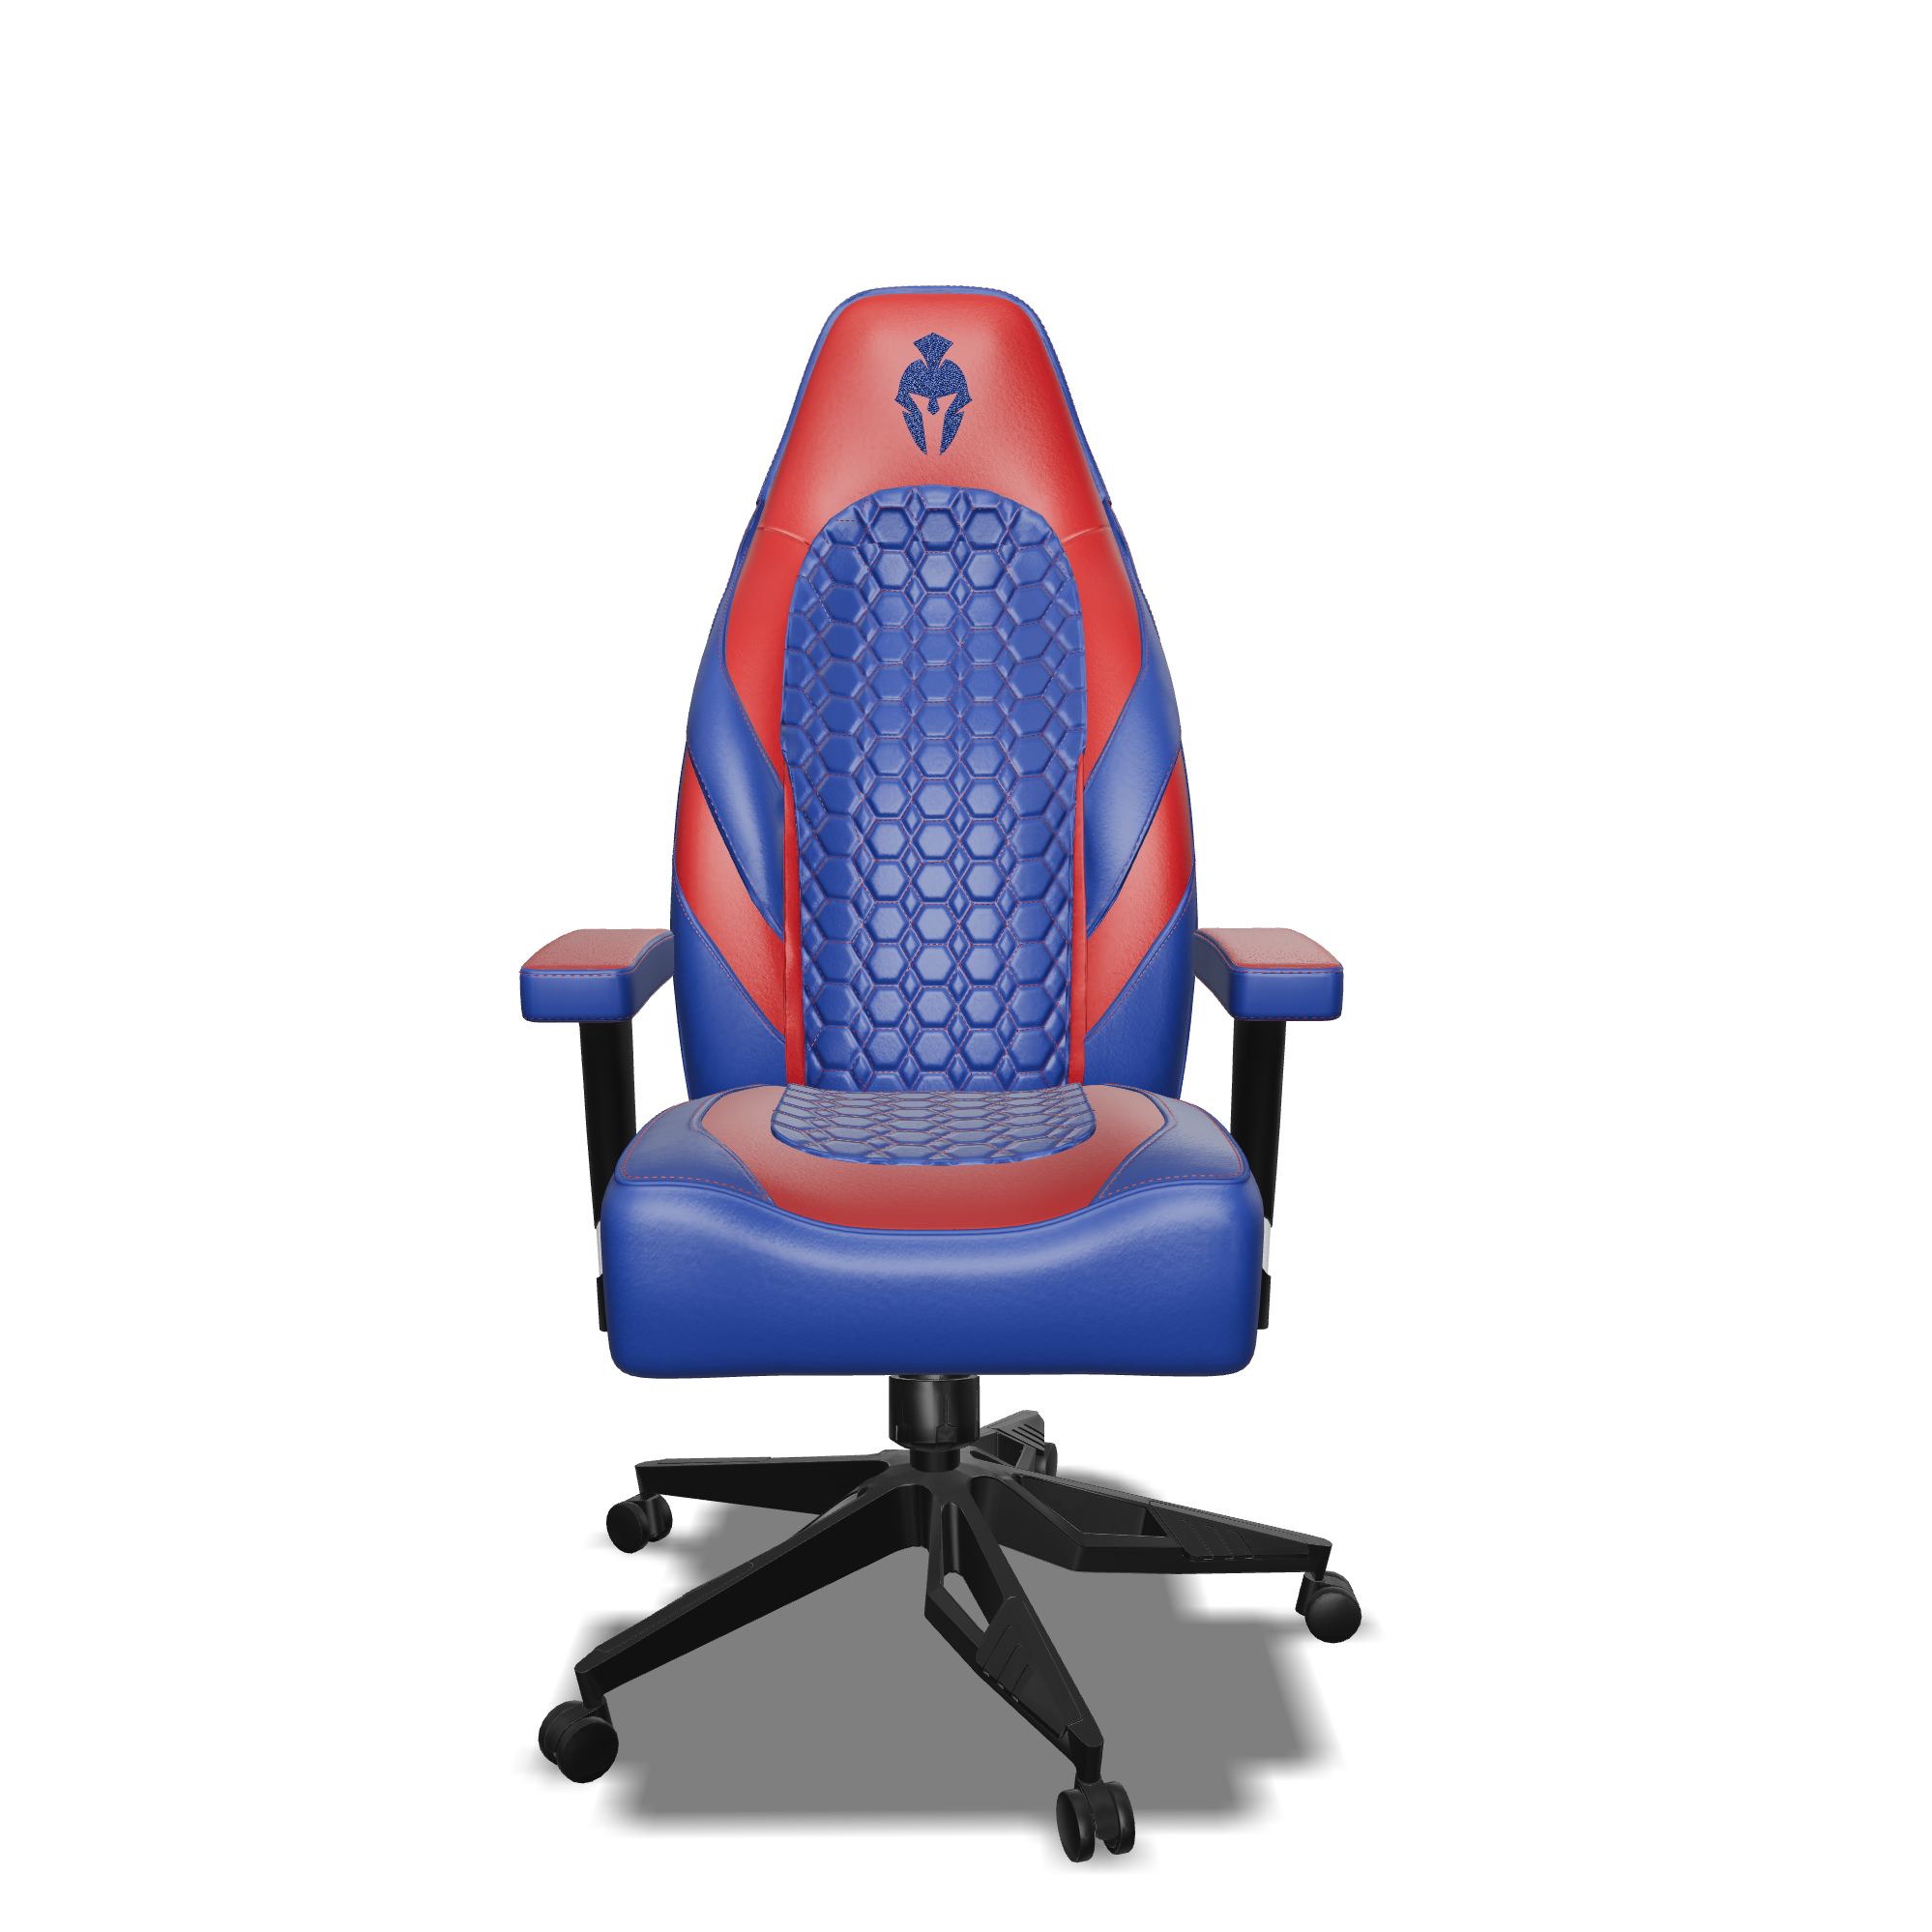 Red and blue gaming chair front view.